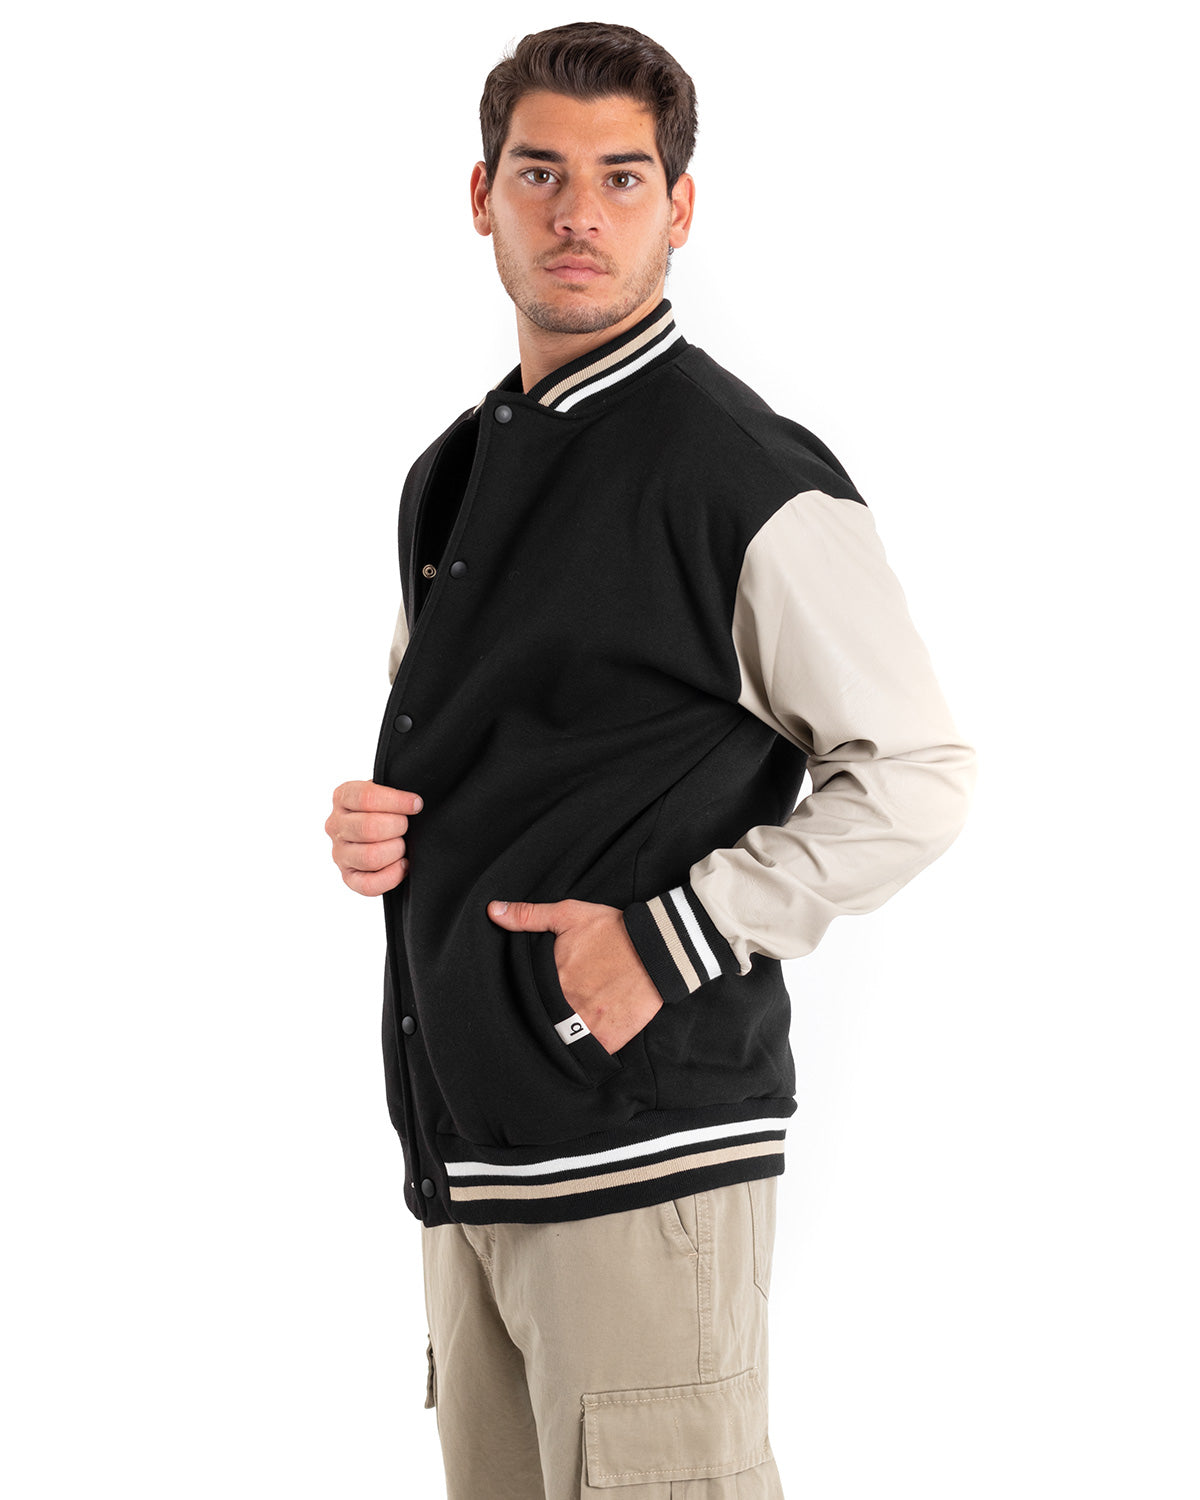 Men's College Varsity Jacket with Faux Leather Sleeves Two-Tone Black Beige GIOSAL